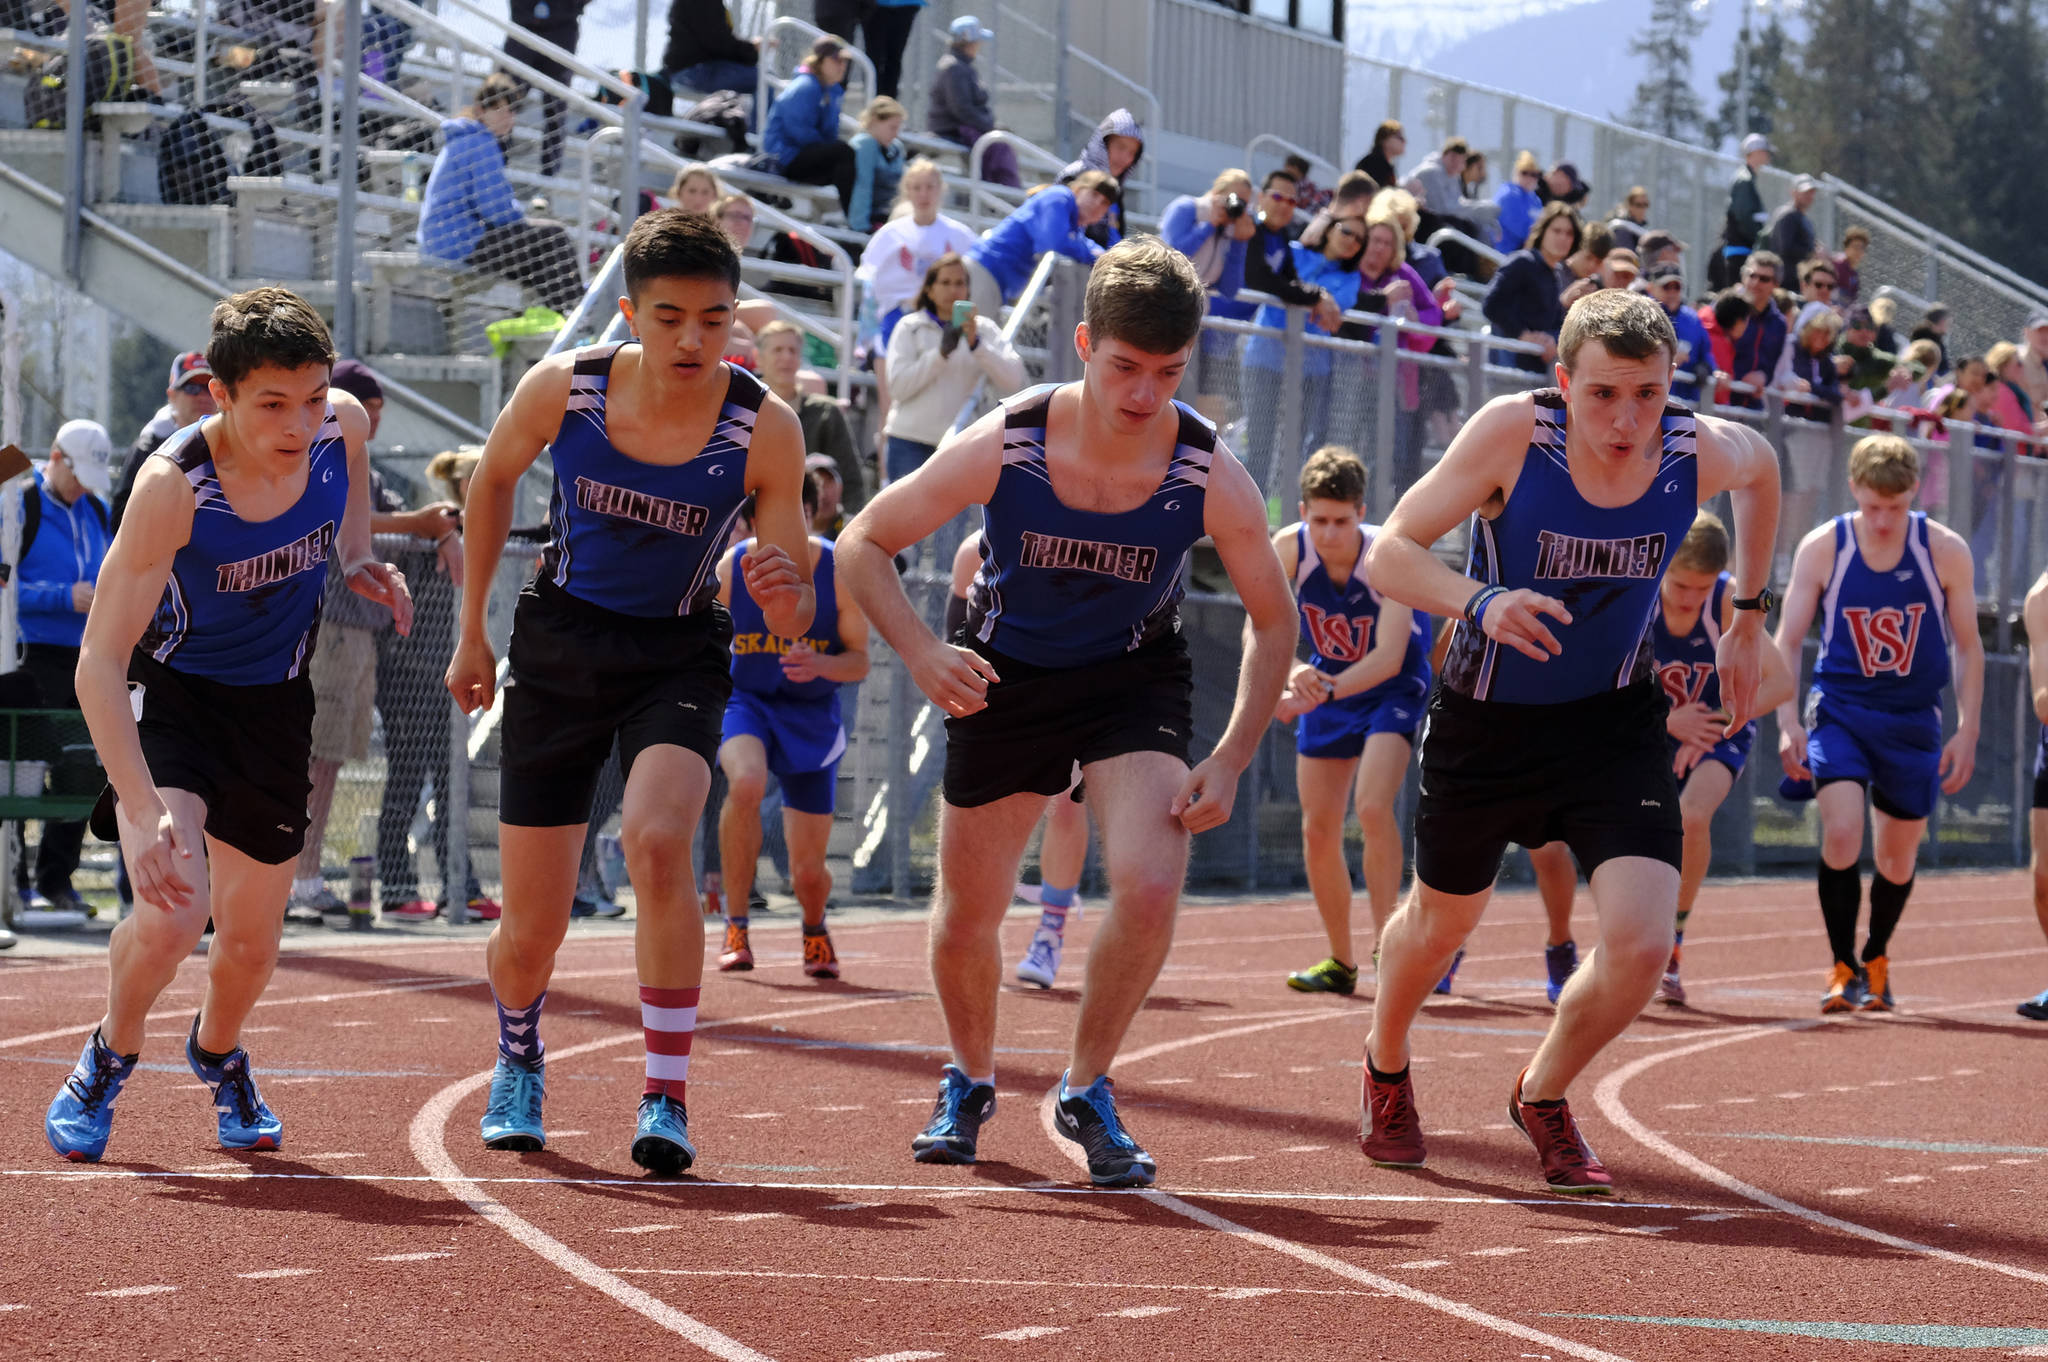 TMHS boys line up at the starting line during the Capital Invitational on Saturday at Thunder Mountain High School. (Lance Nesbitt | For the Juneau Empire)